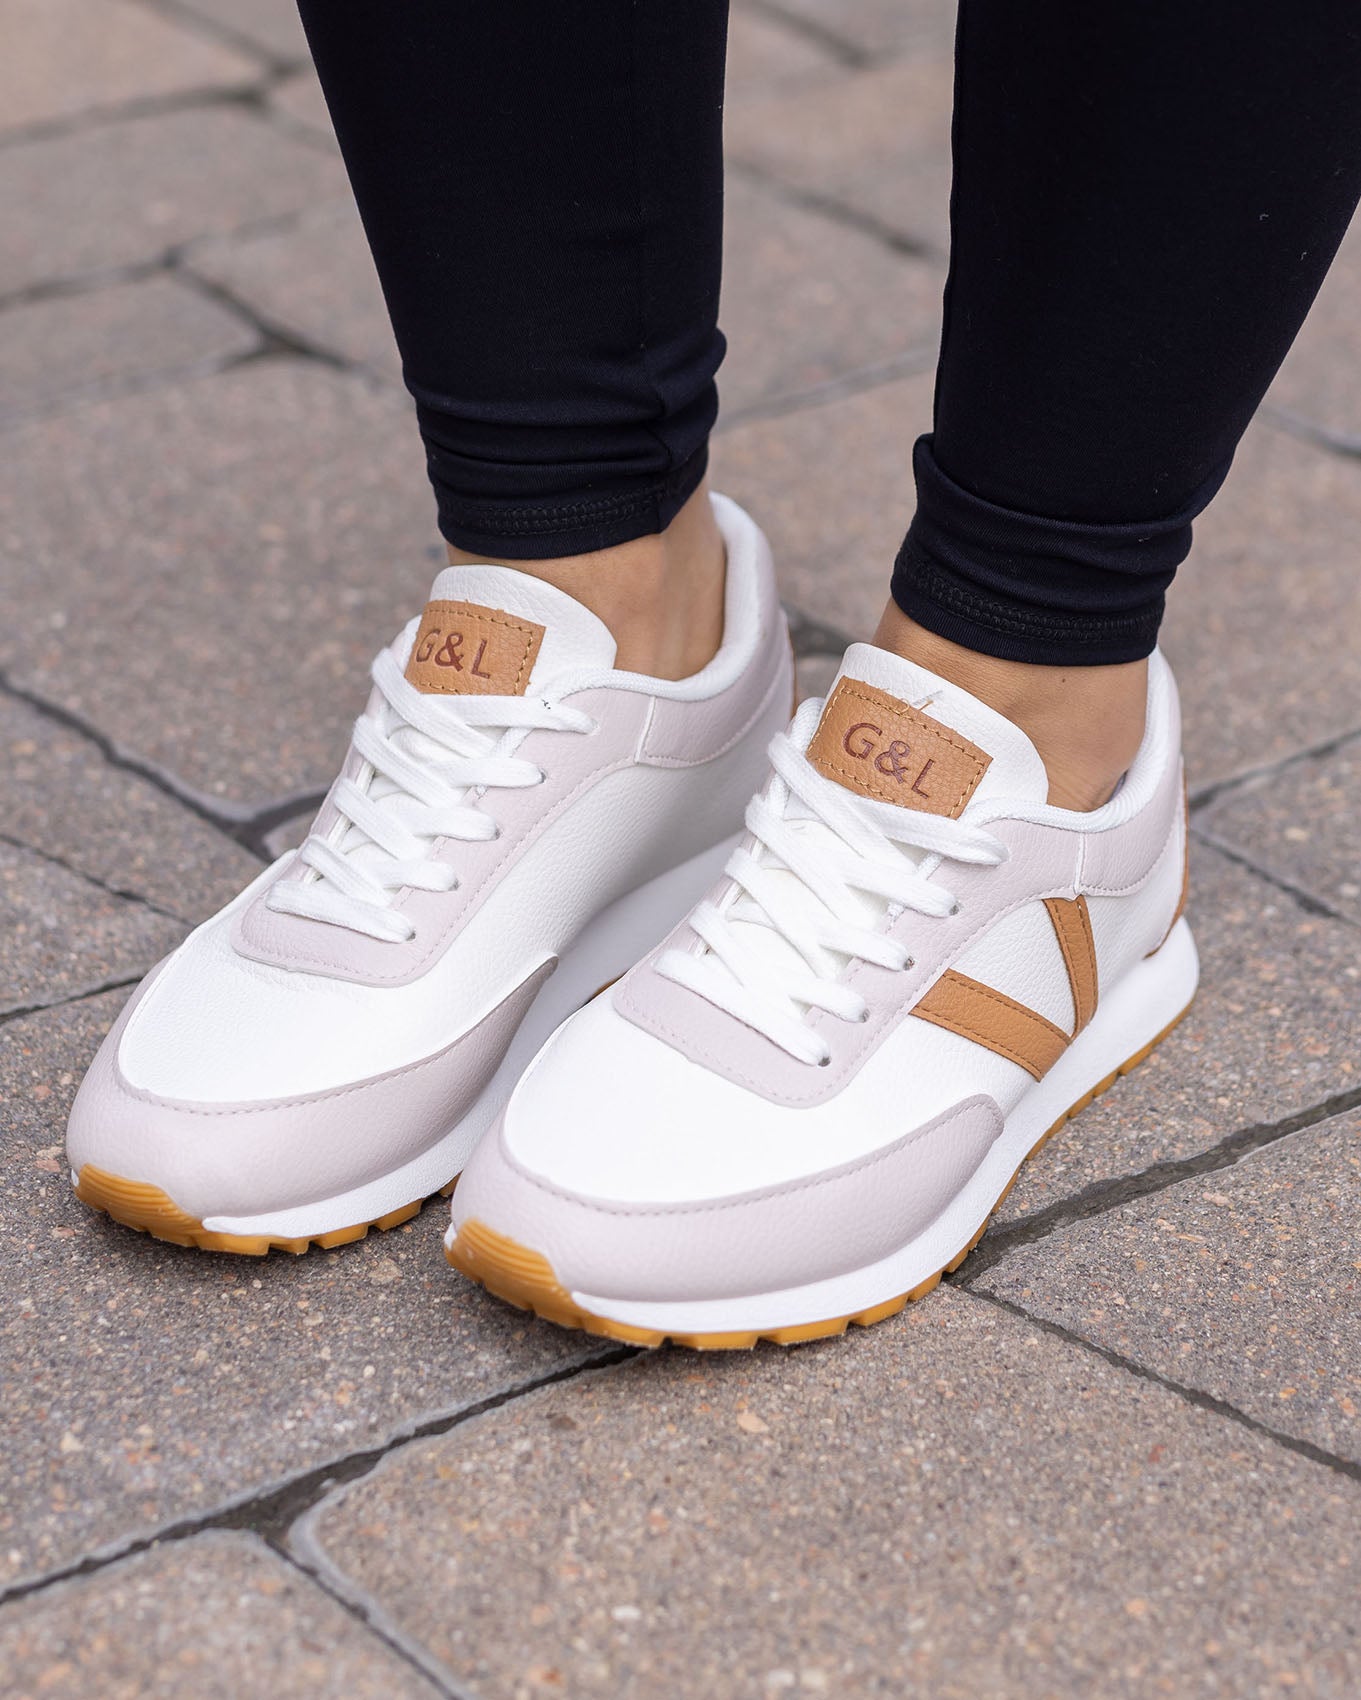 Tan/Nude Street Sneakers Grace and Lace